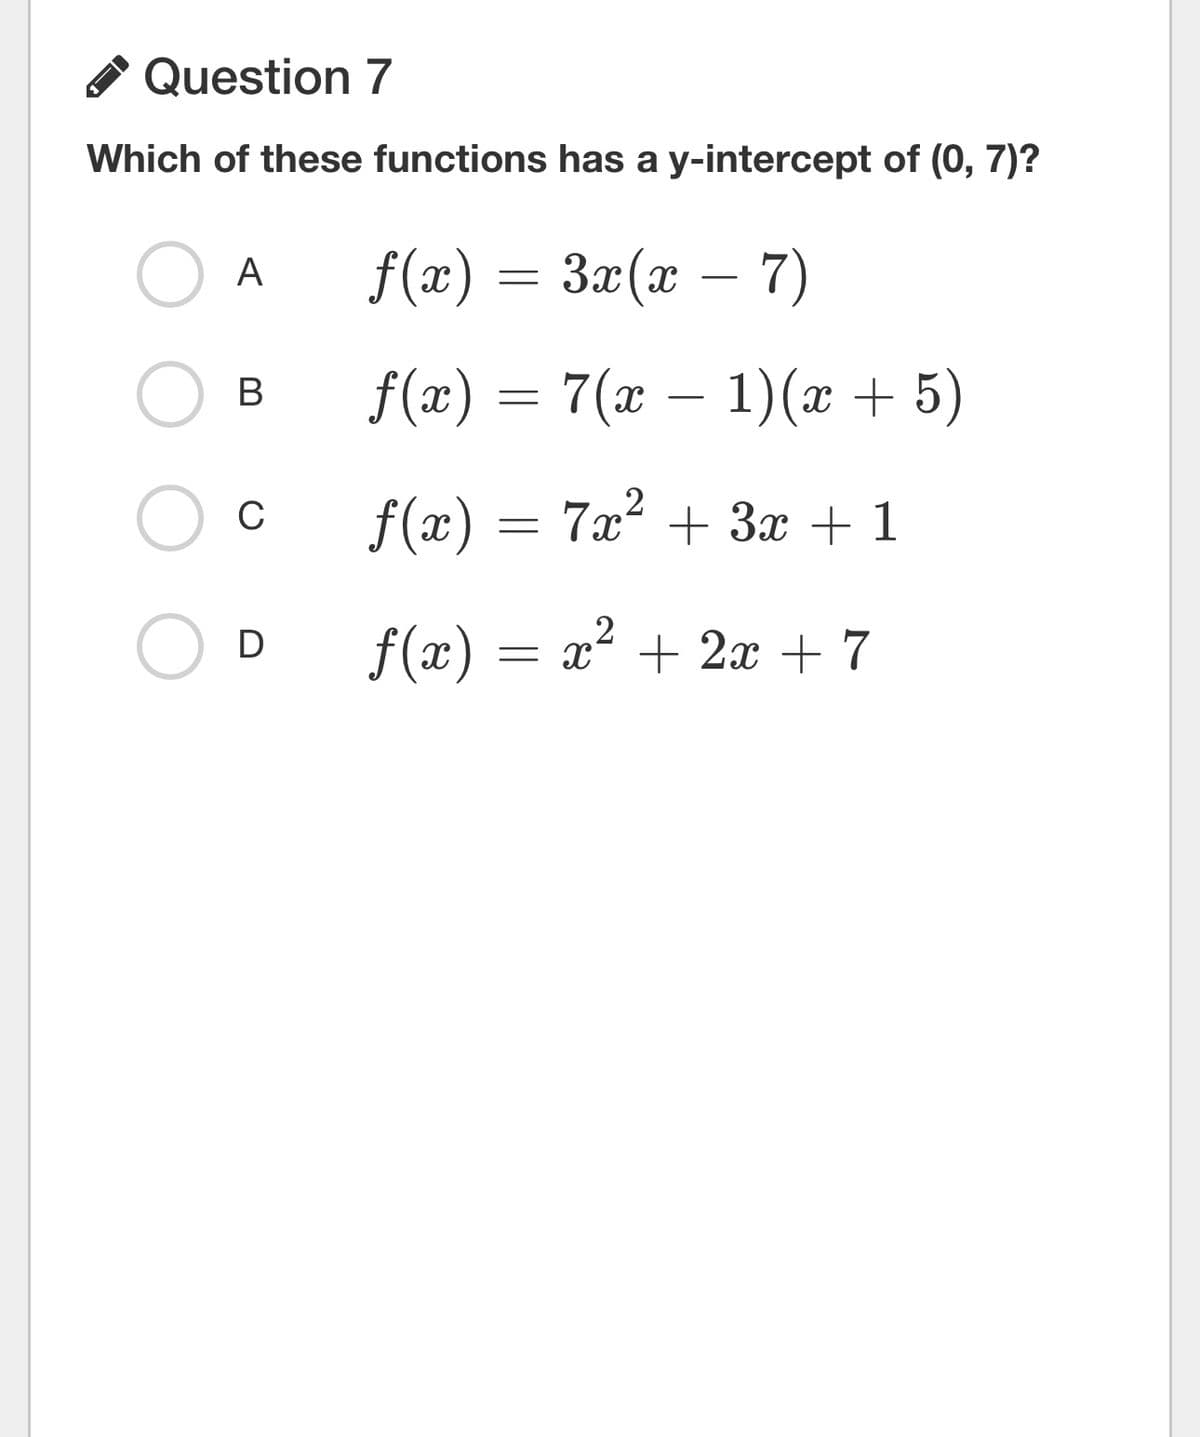 Question 7
Which of these functions has a y-intercept of (0, 7)?
f(x) = 3x(x − 7)
f(x) = 7(x − 1)(x + 5)
ƒ(x) = 7x² + 3x + 1
OD f(x) = x² + 2x + 7
A
B
C